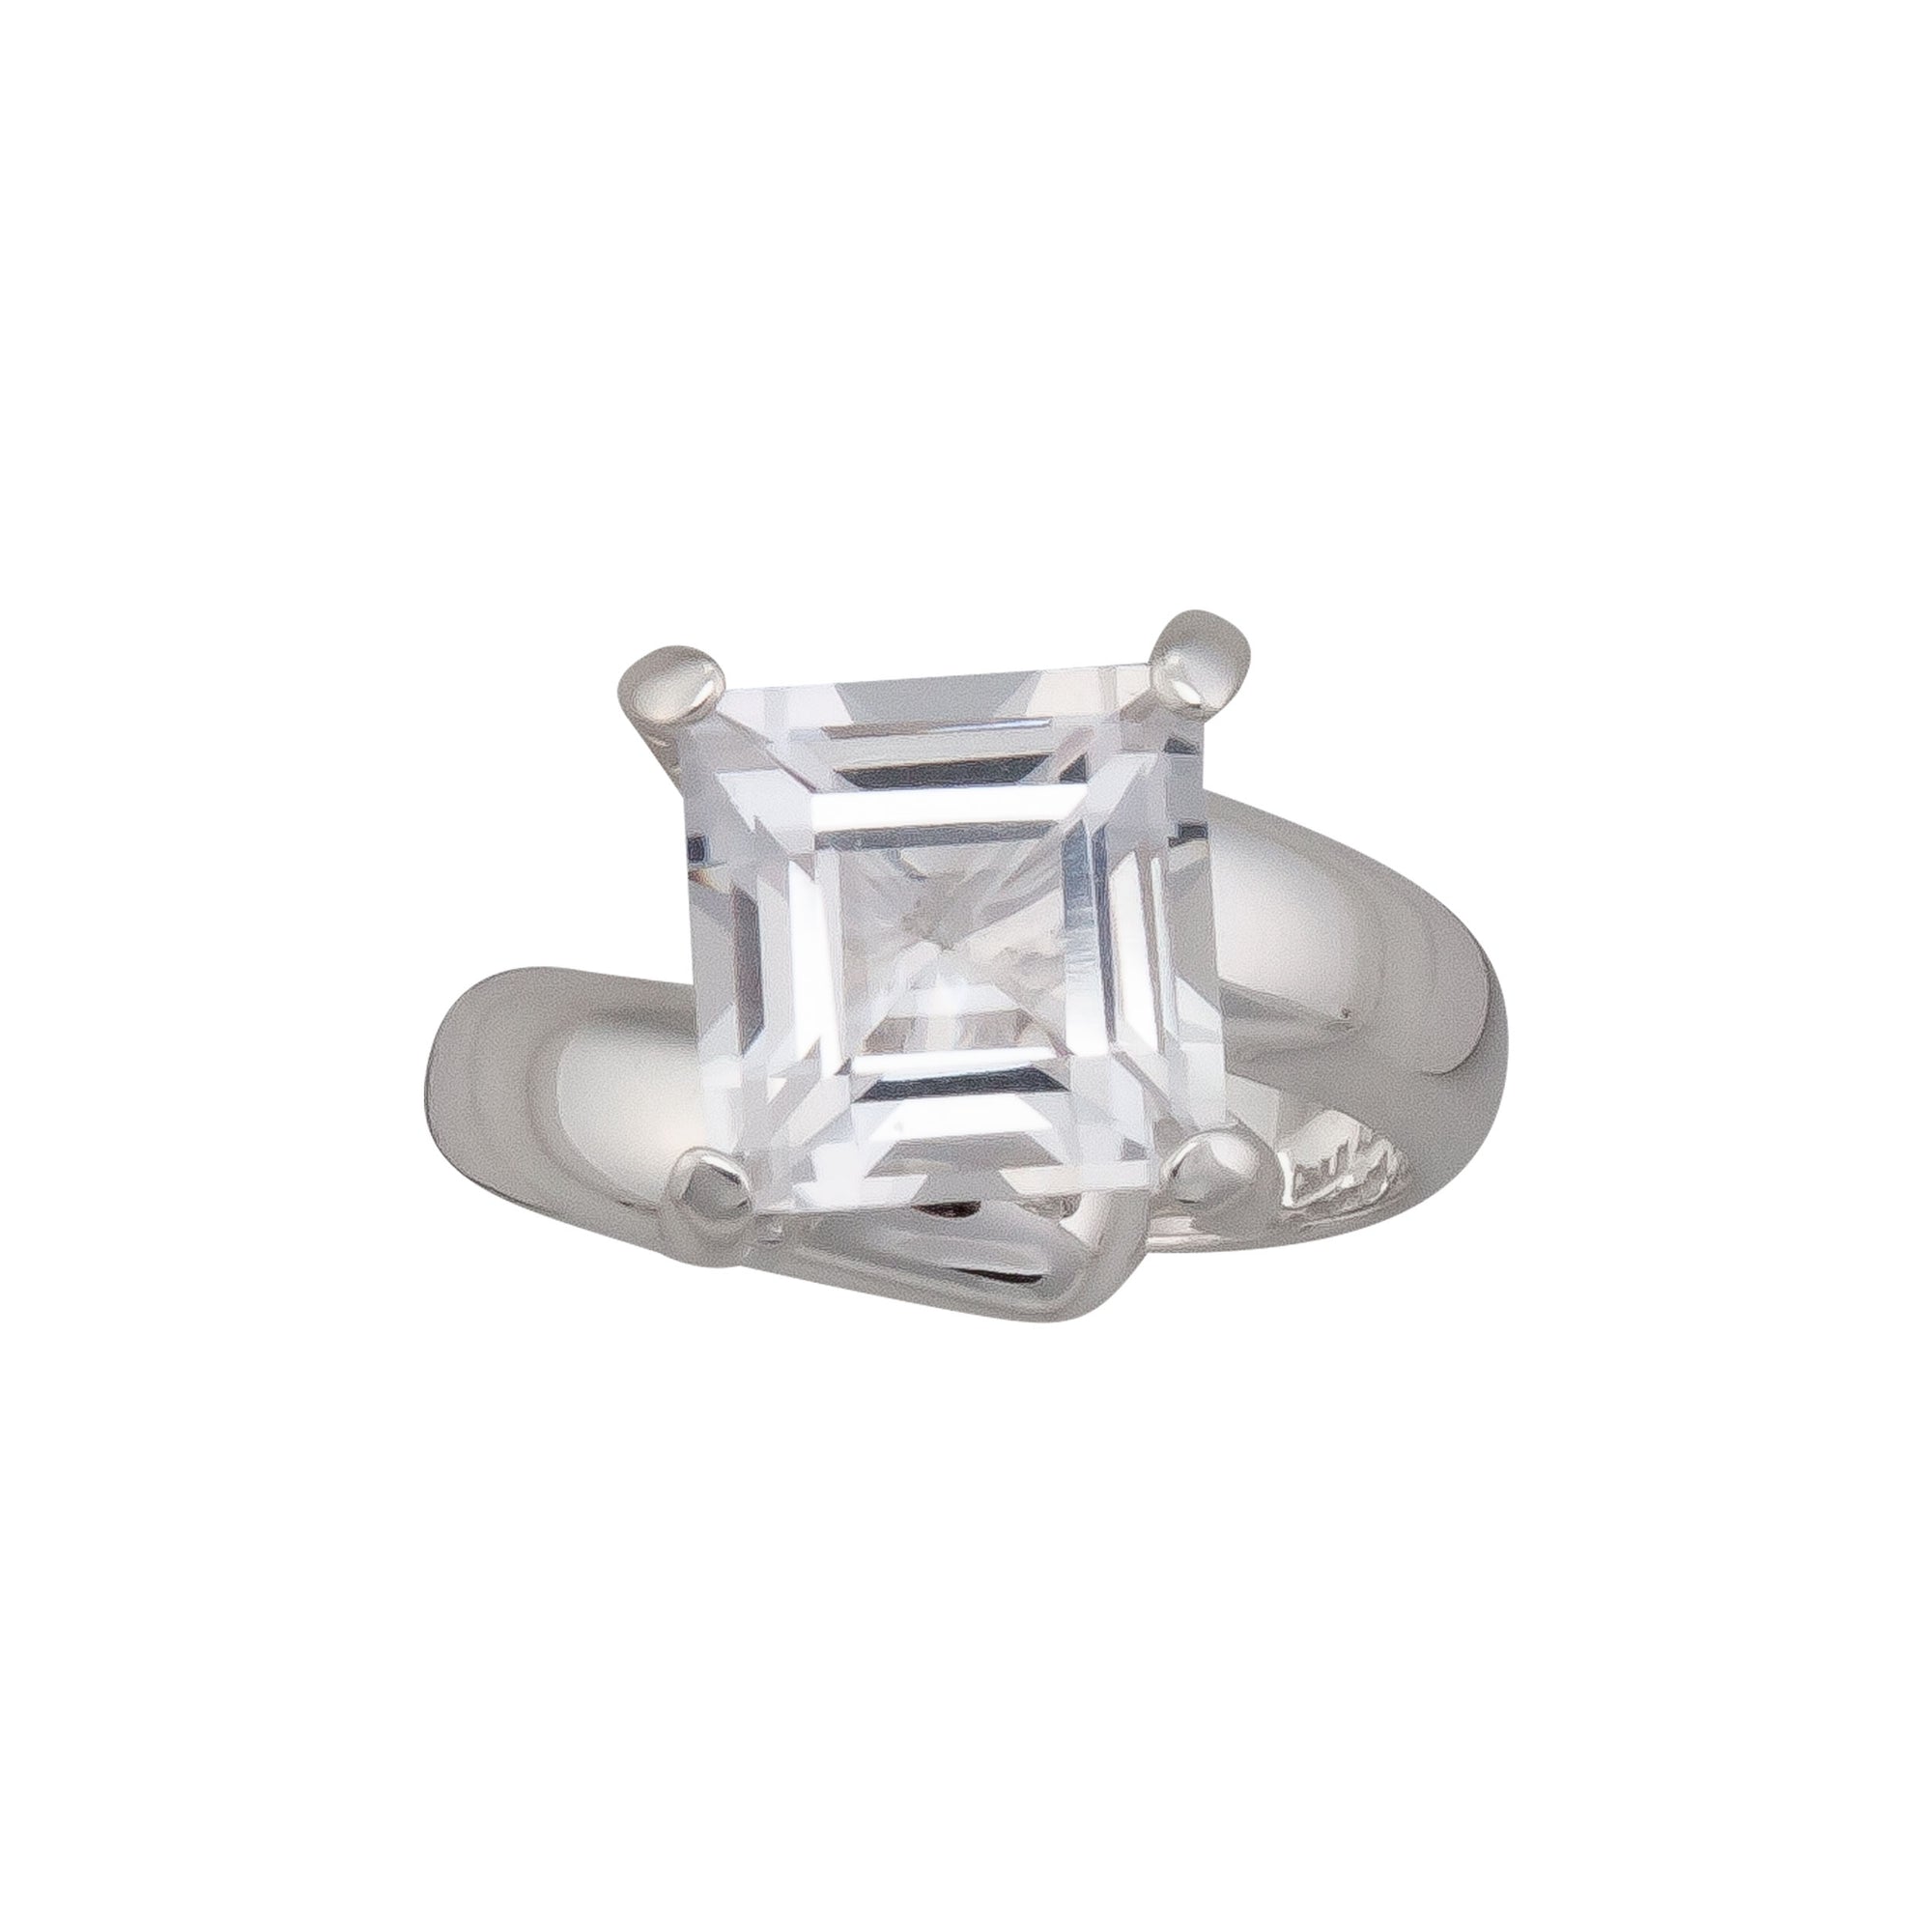 Sterling Silver Clear Quartz Prong Set Ring | Charles Albert Jewelry